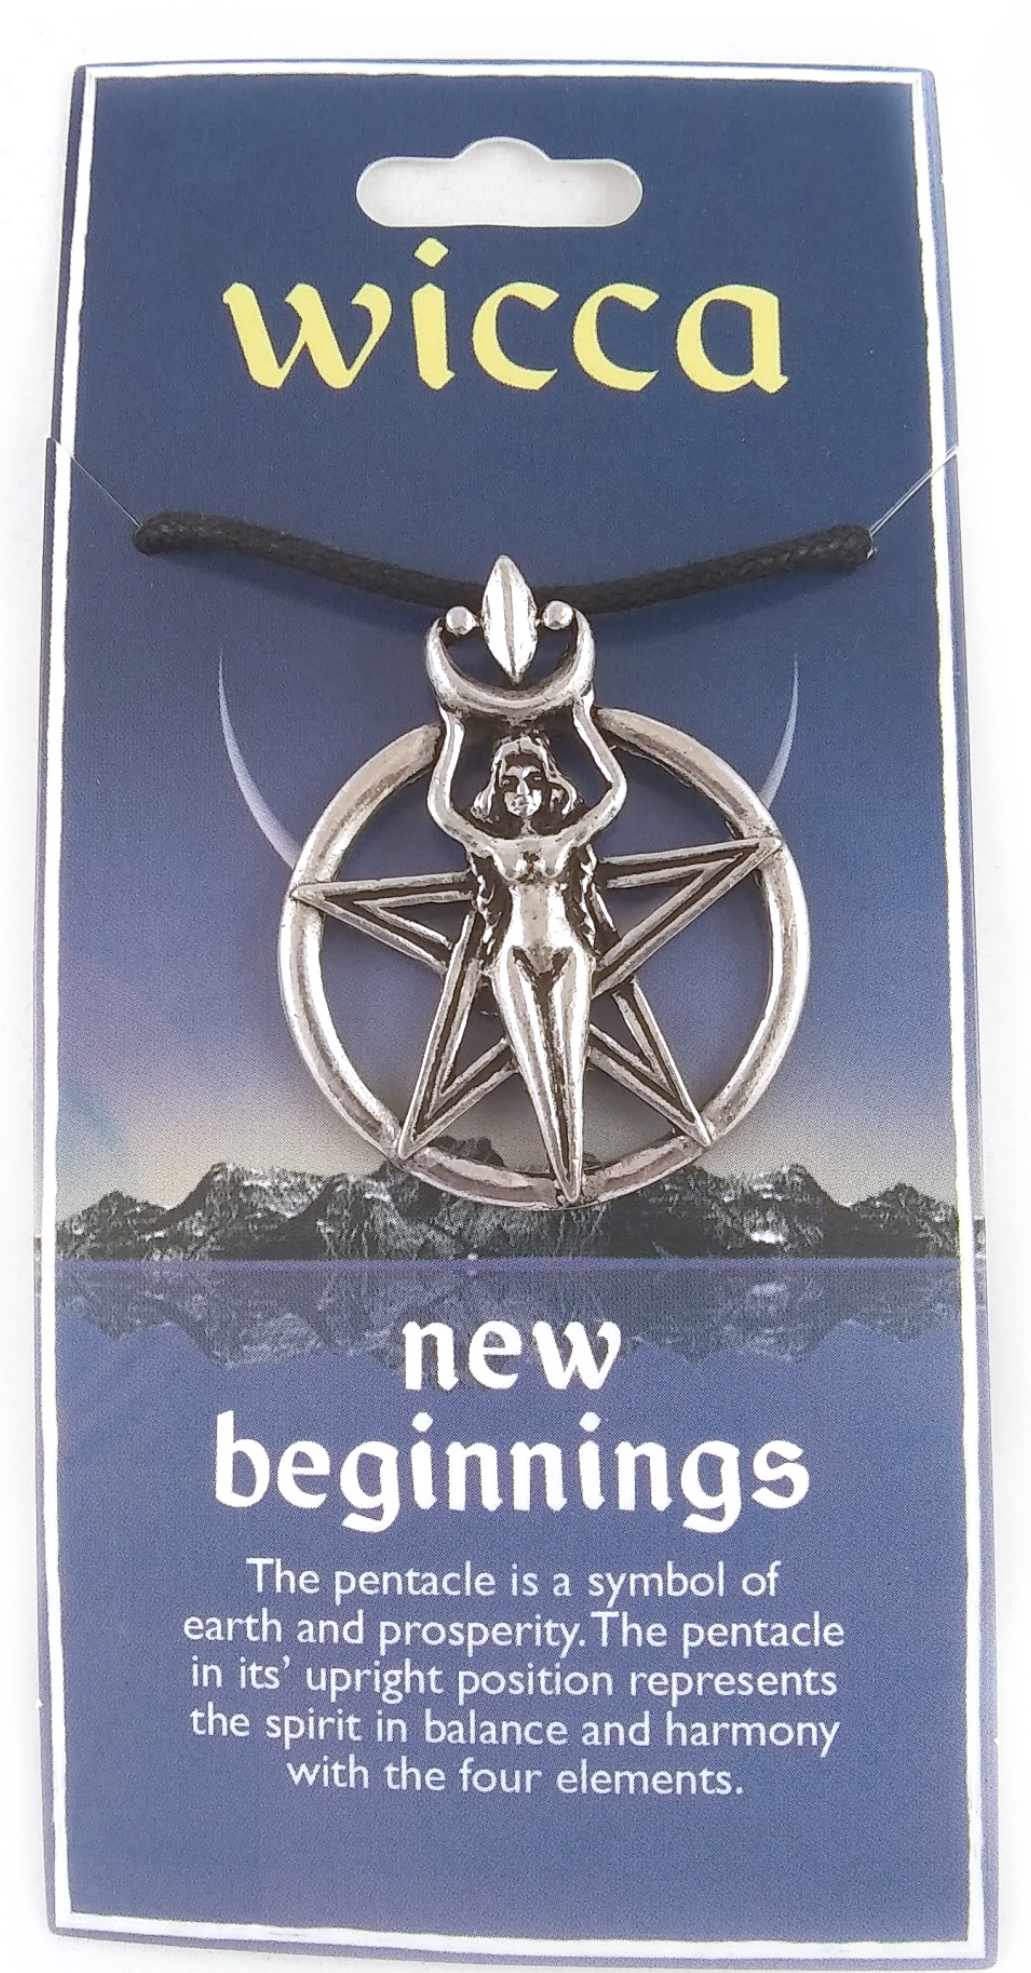 Wicca new beginnings necklace